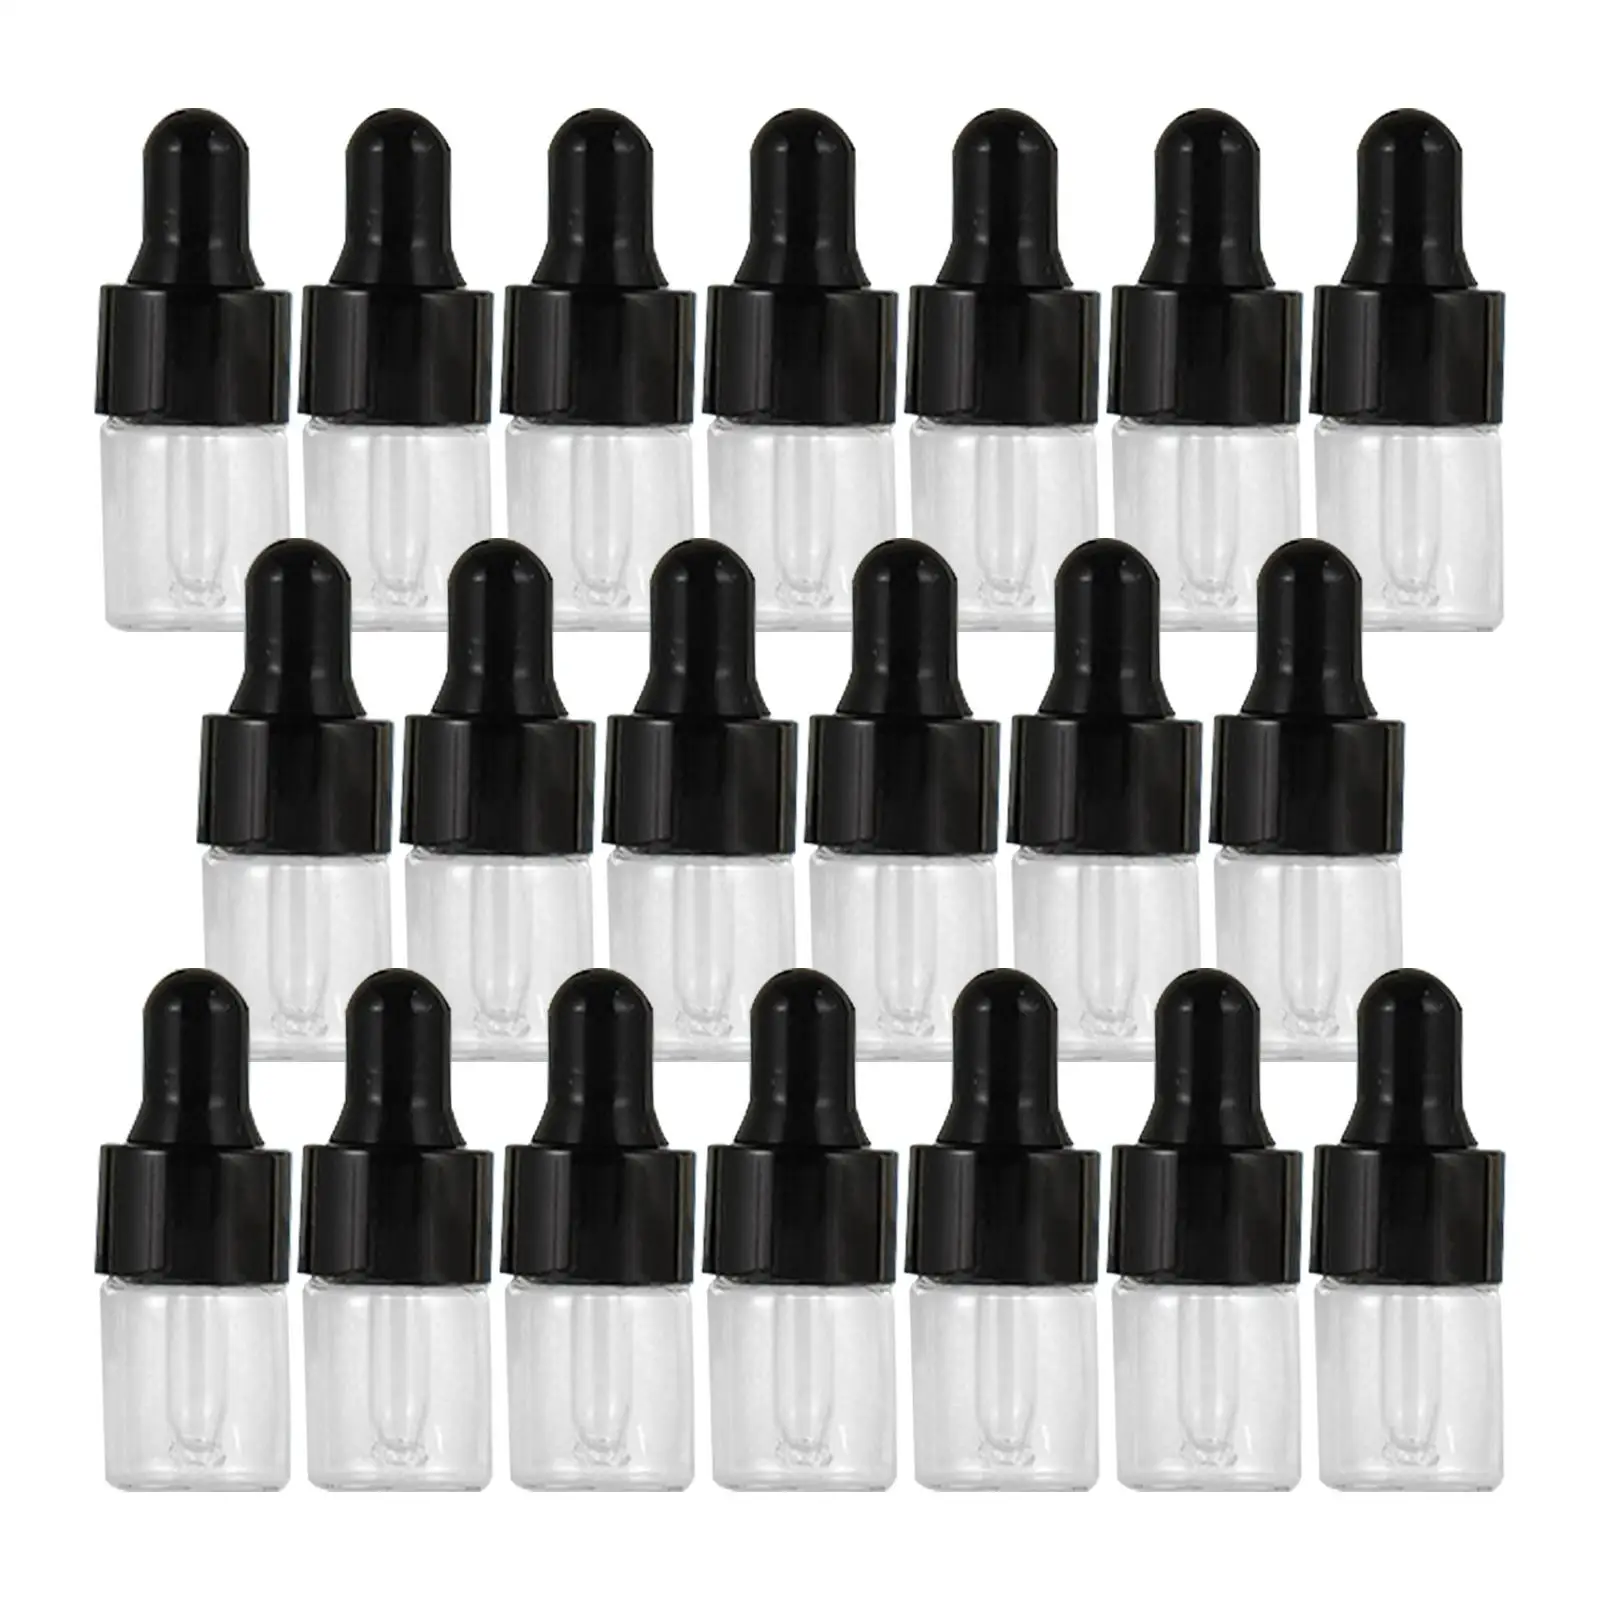 20x Glass Dropper Bottles with Eye Droppers Leakproof for Perfume Oils